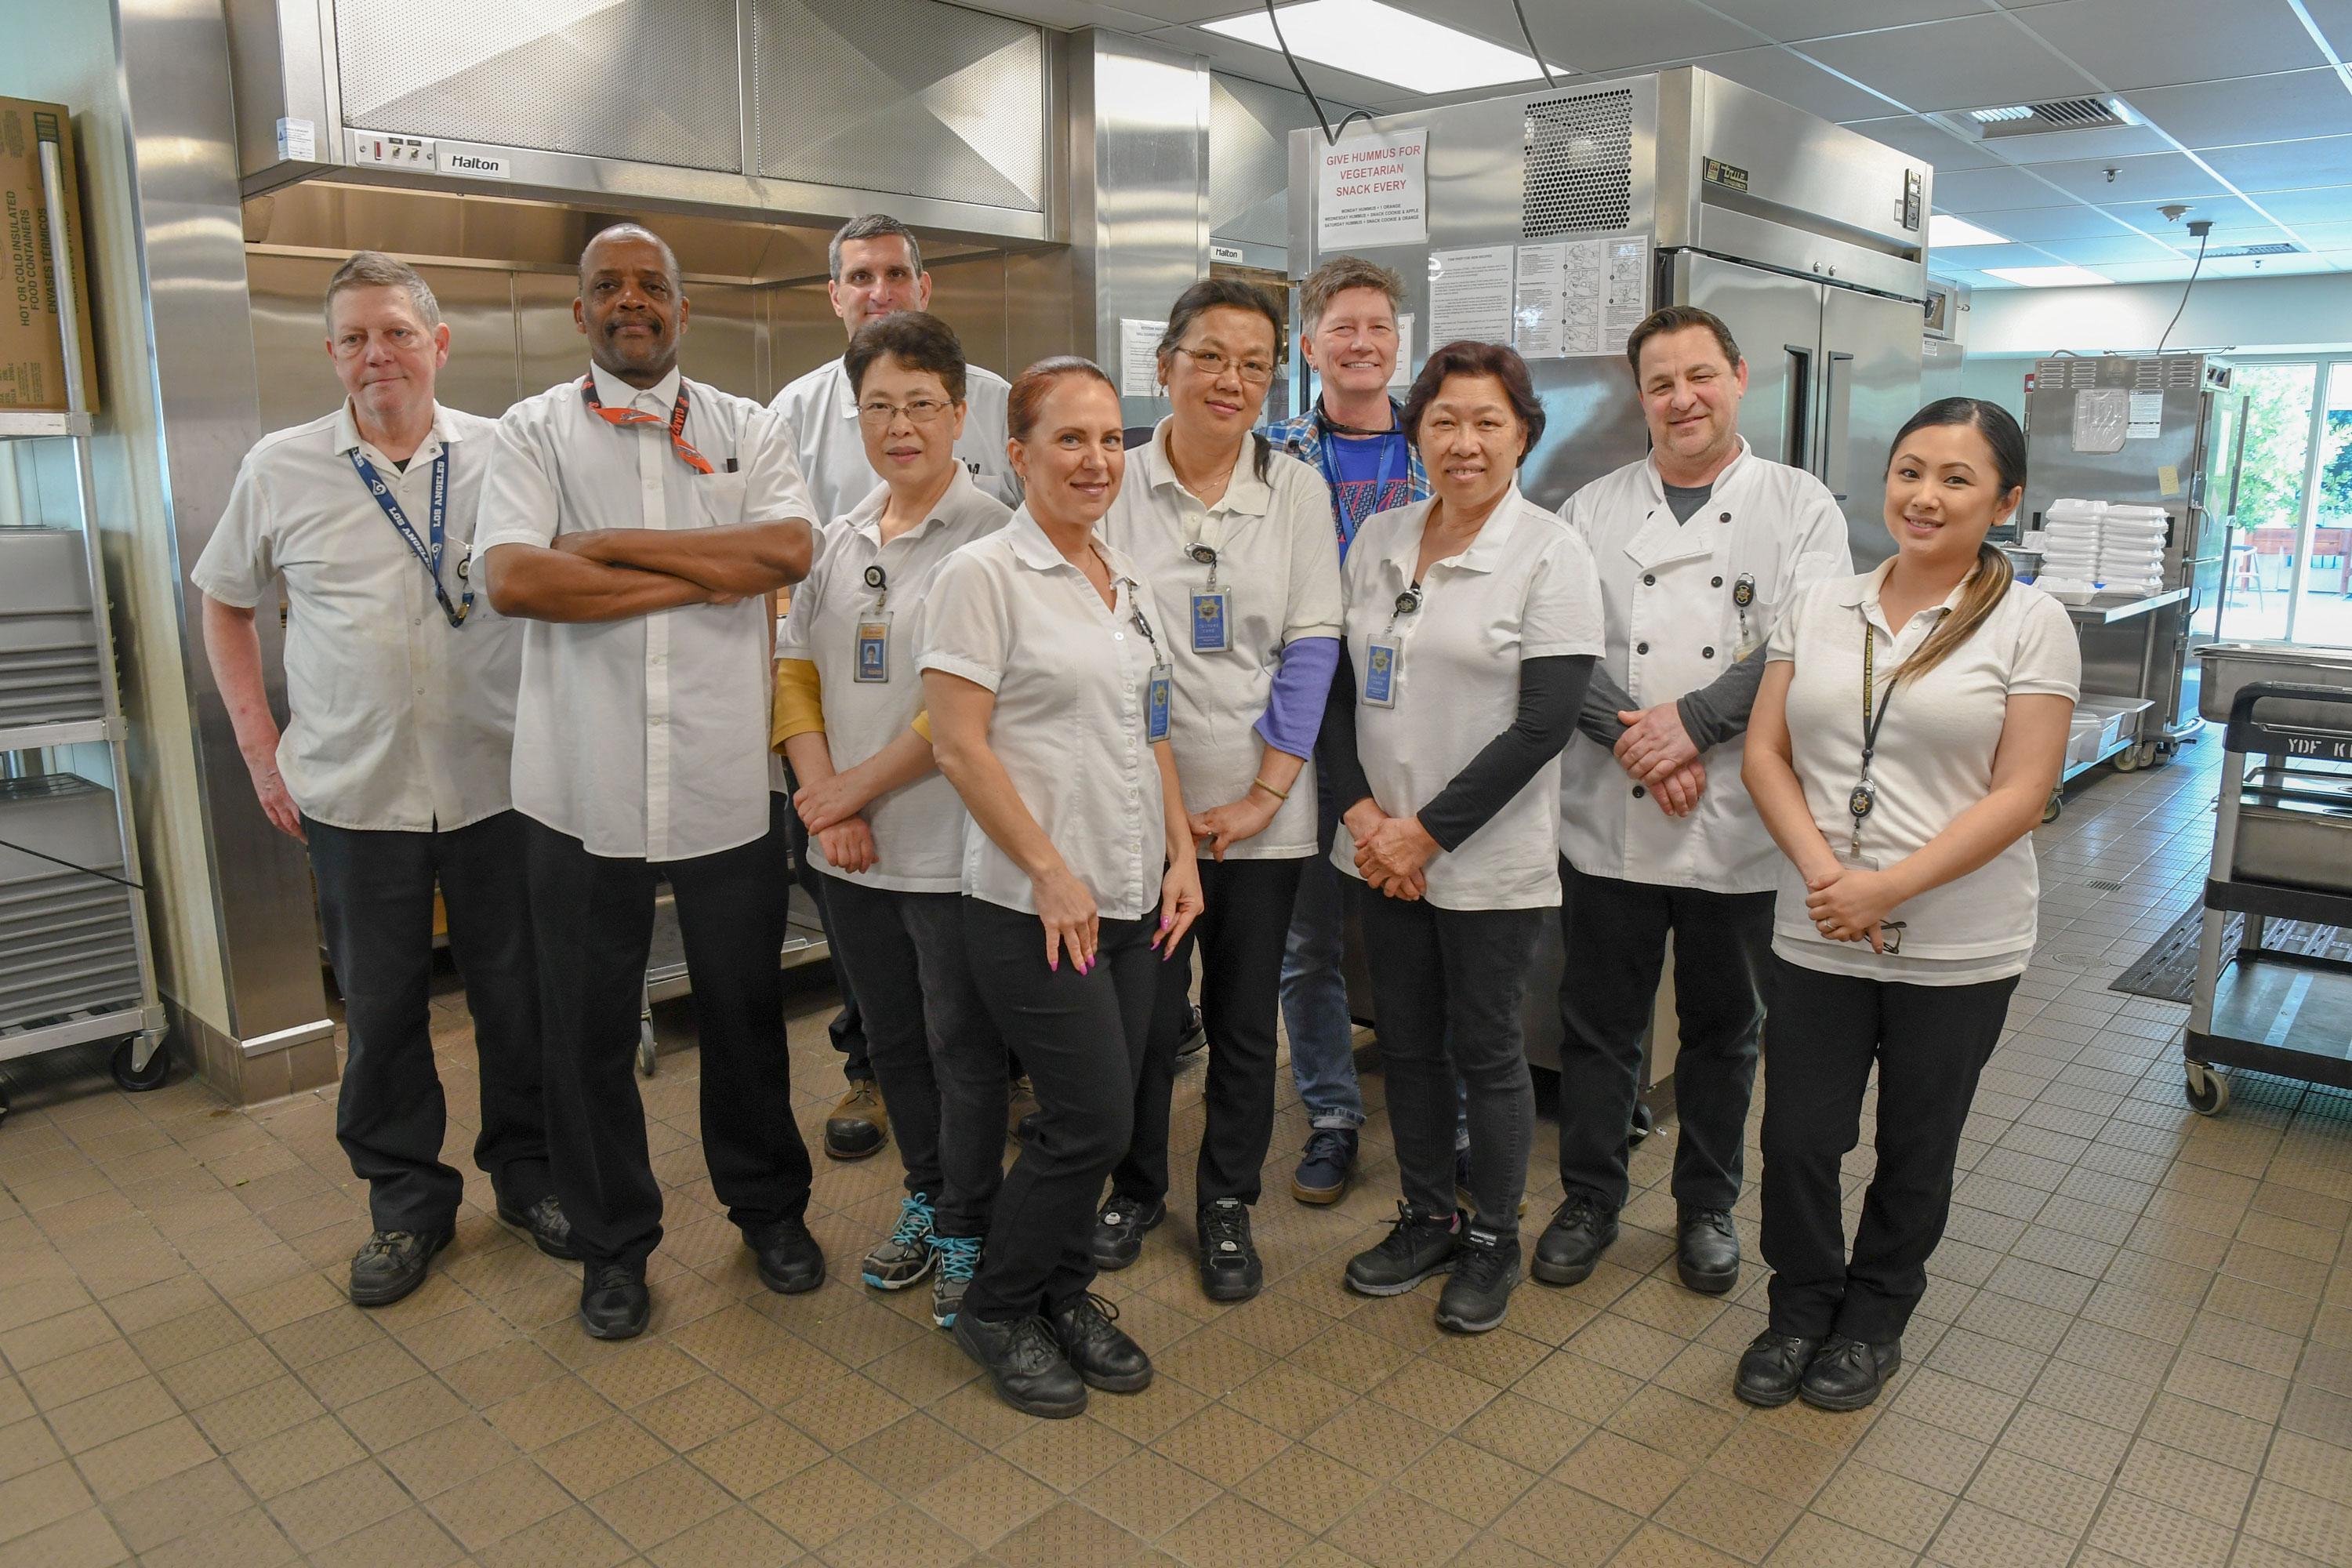 VMO Claudia McFarland and food service workers at the Sacramento County Juvenile Detention Facility